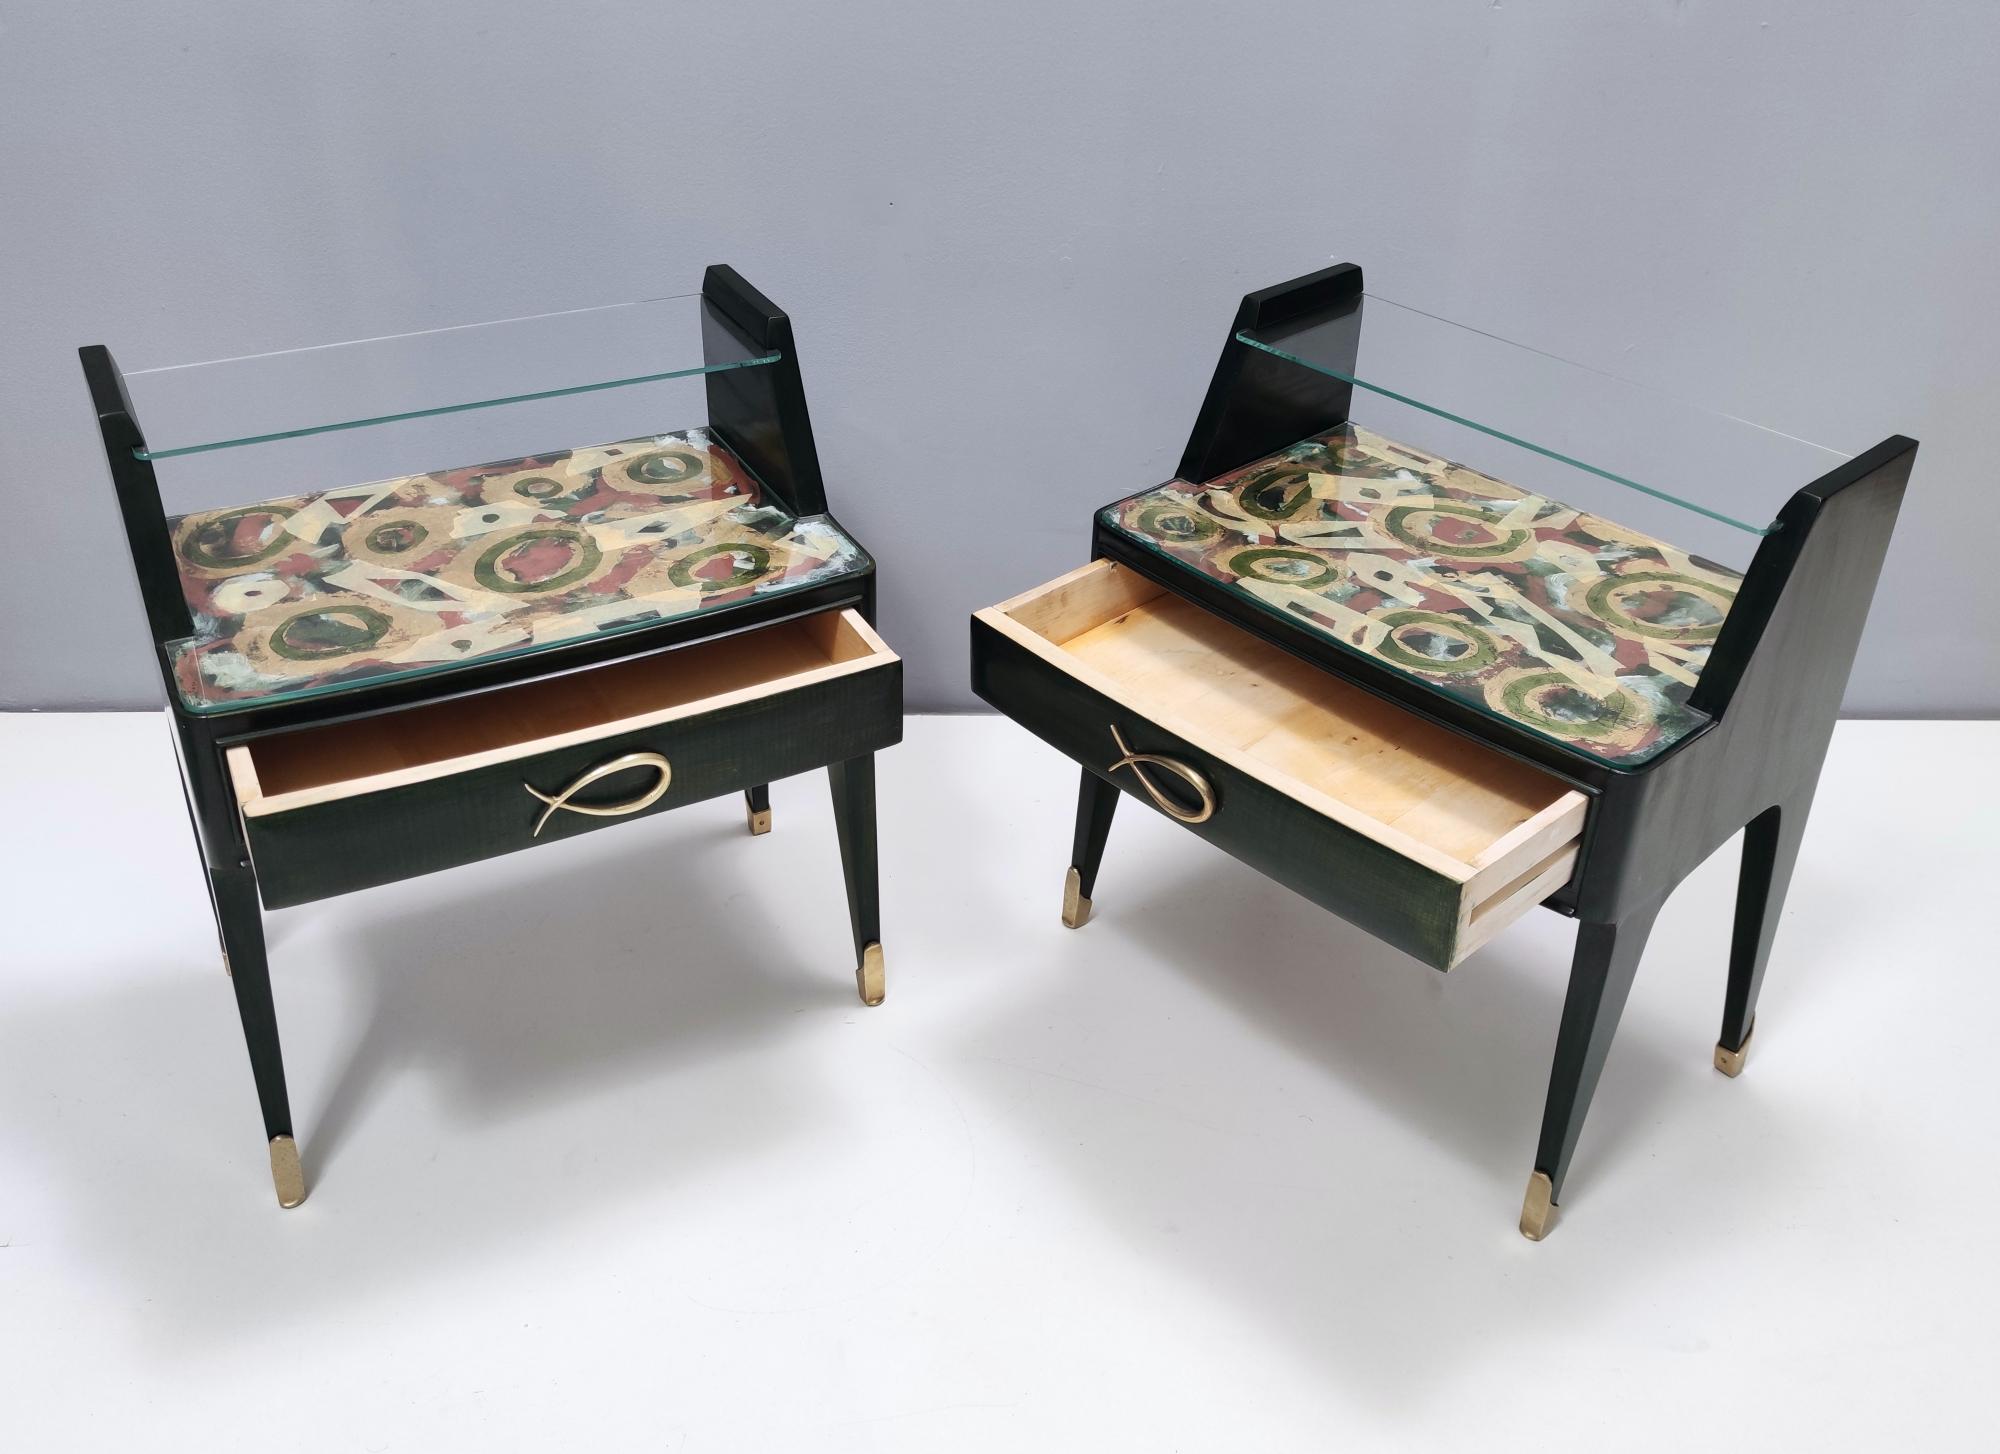 Mid-20th Century Pair of Dark Green Wooden Nightstands in 1950s Style with a Decorated Top, Italy For Sale